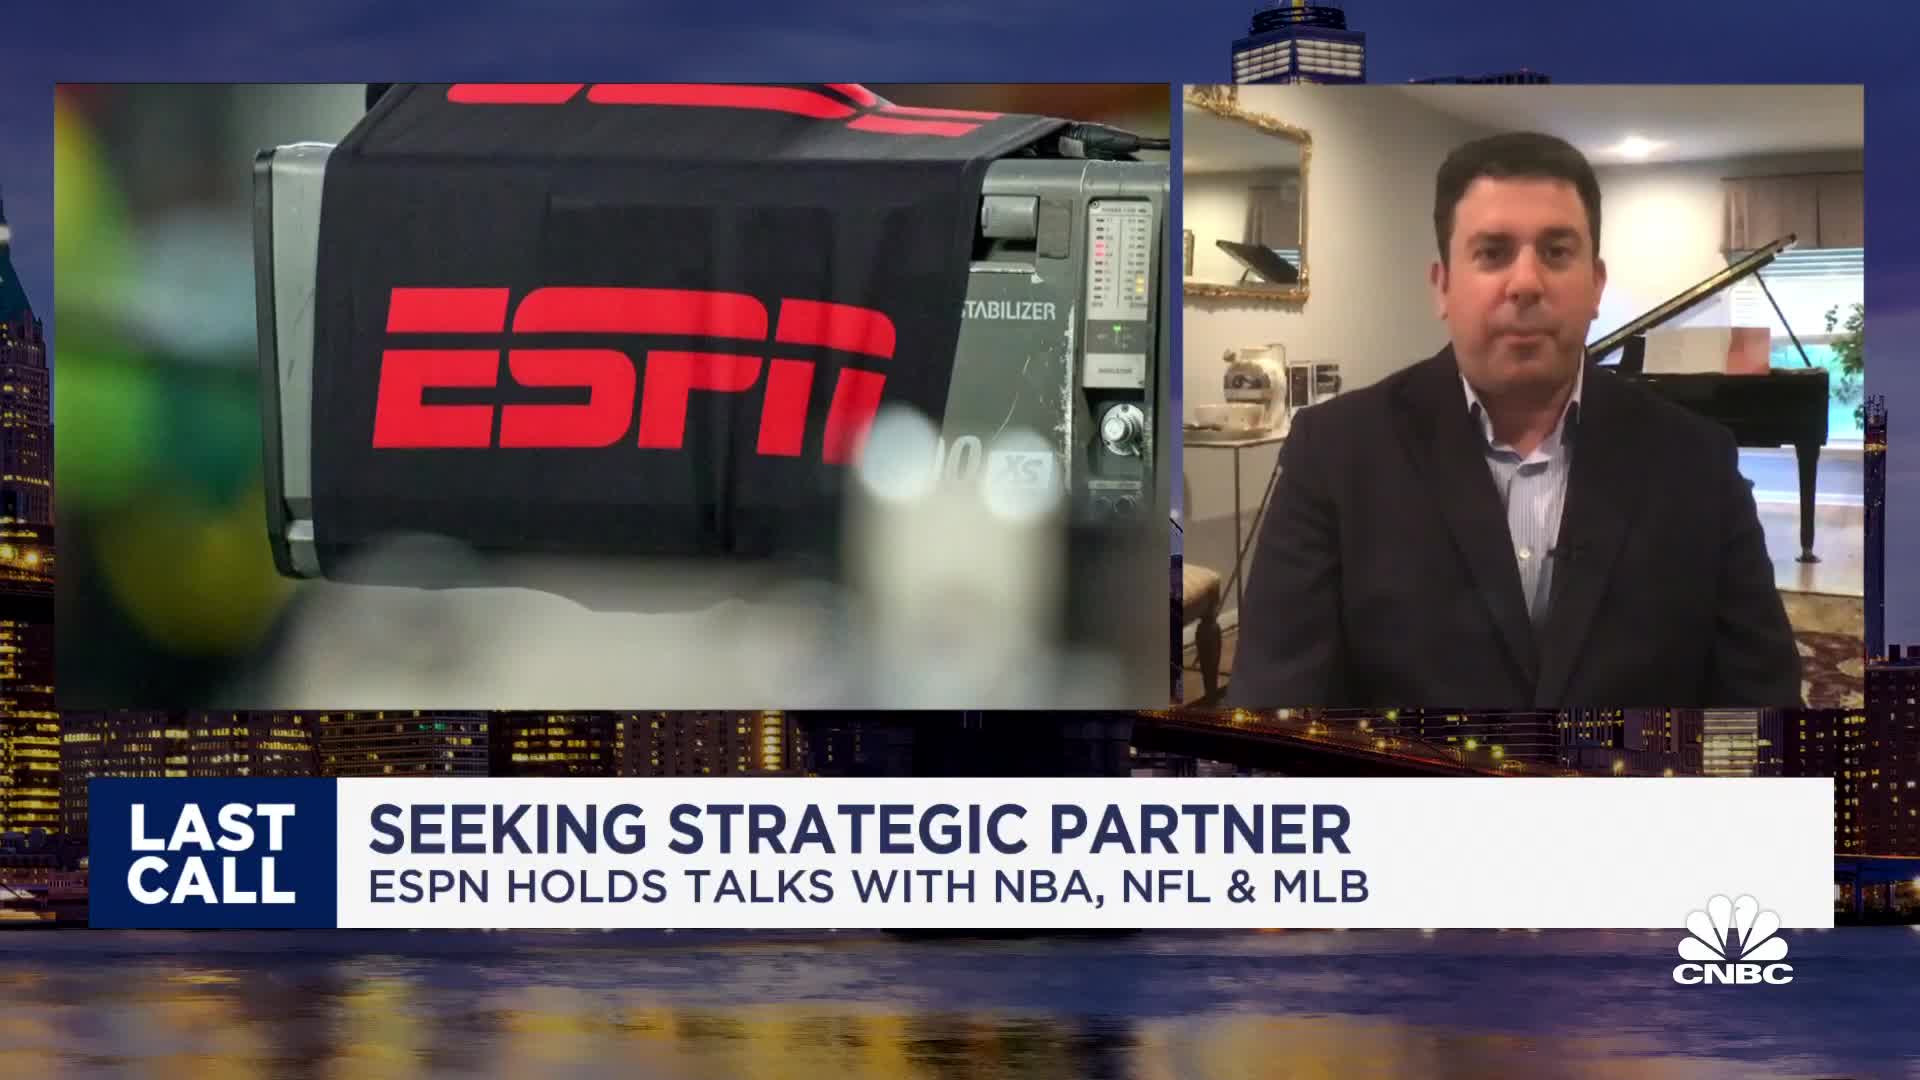 ESPN reportedly approached NBA, NFL and MLB about strategic partnership